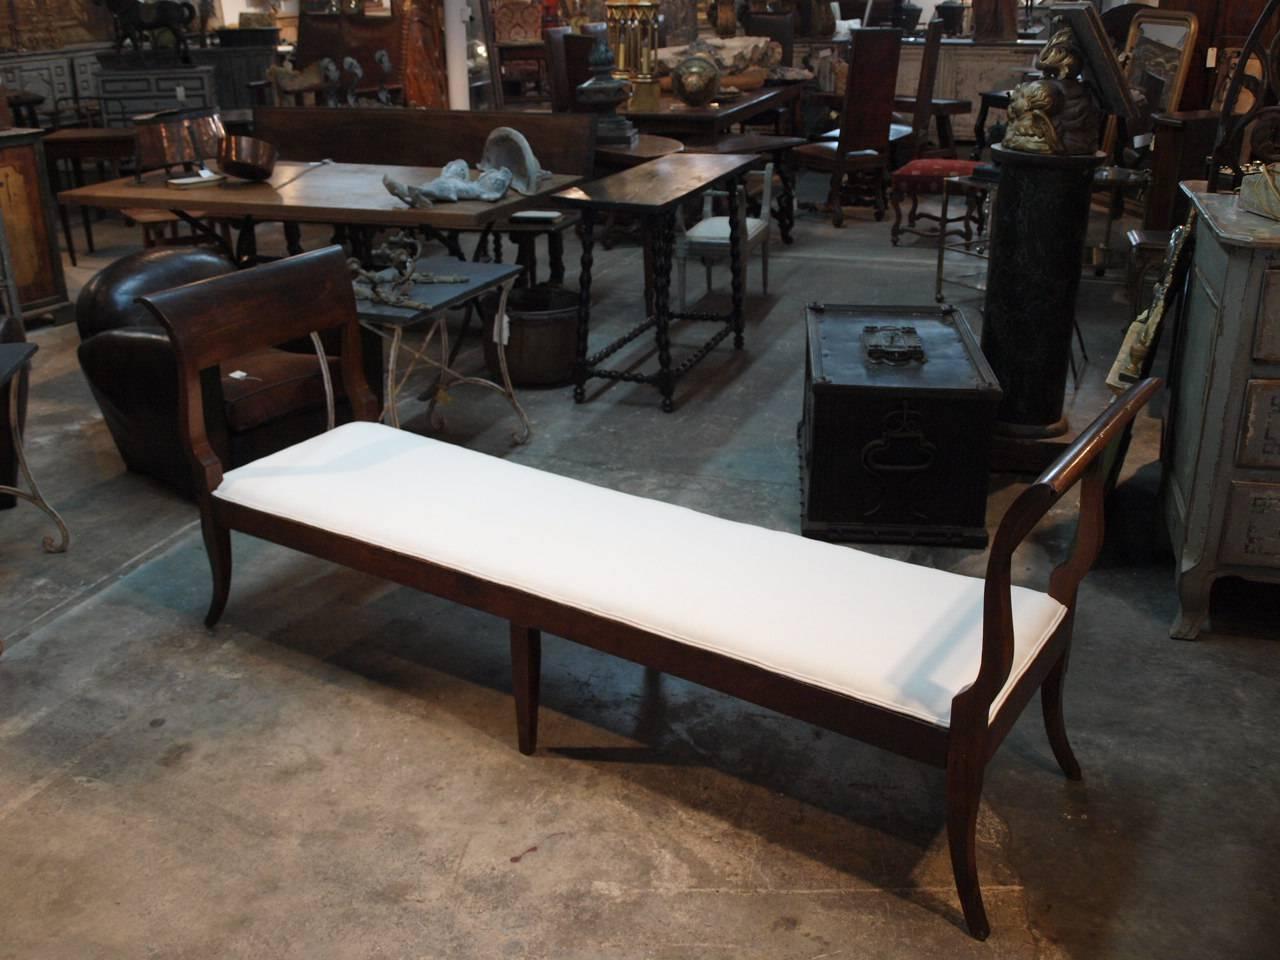 A very lovely and elegant 19th century Banquette from Bologna, Italy. Handsomely constructed in chestnut with clean and Minimalist lines. Newly reupholstered. Measures: 18